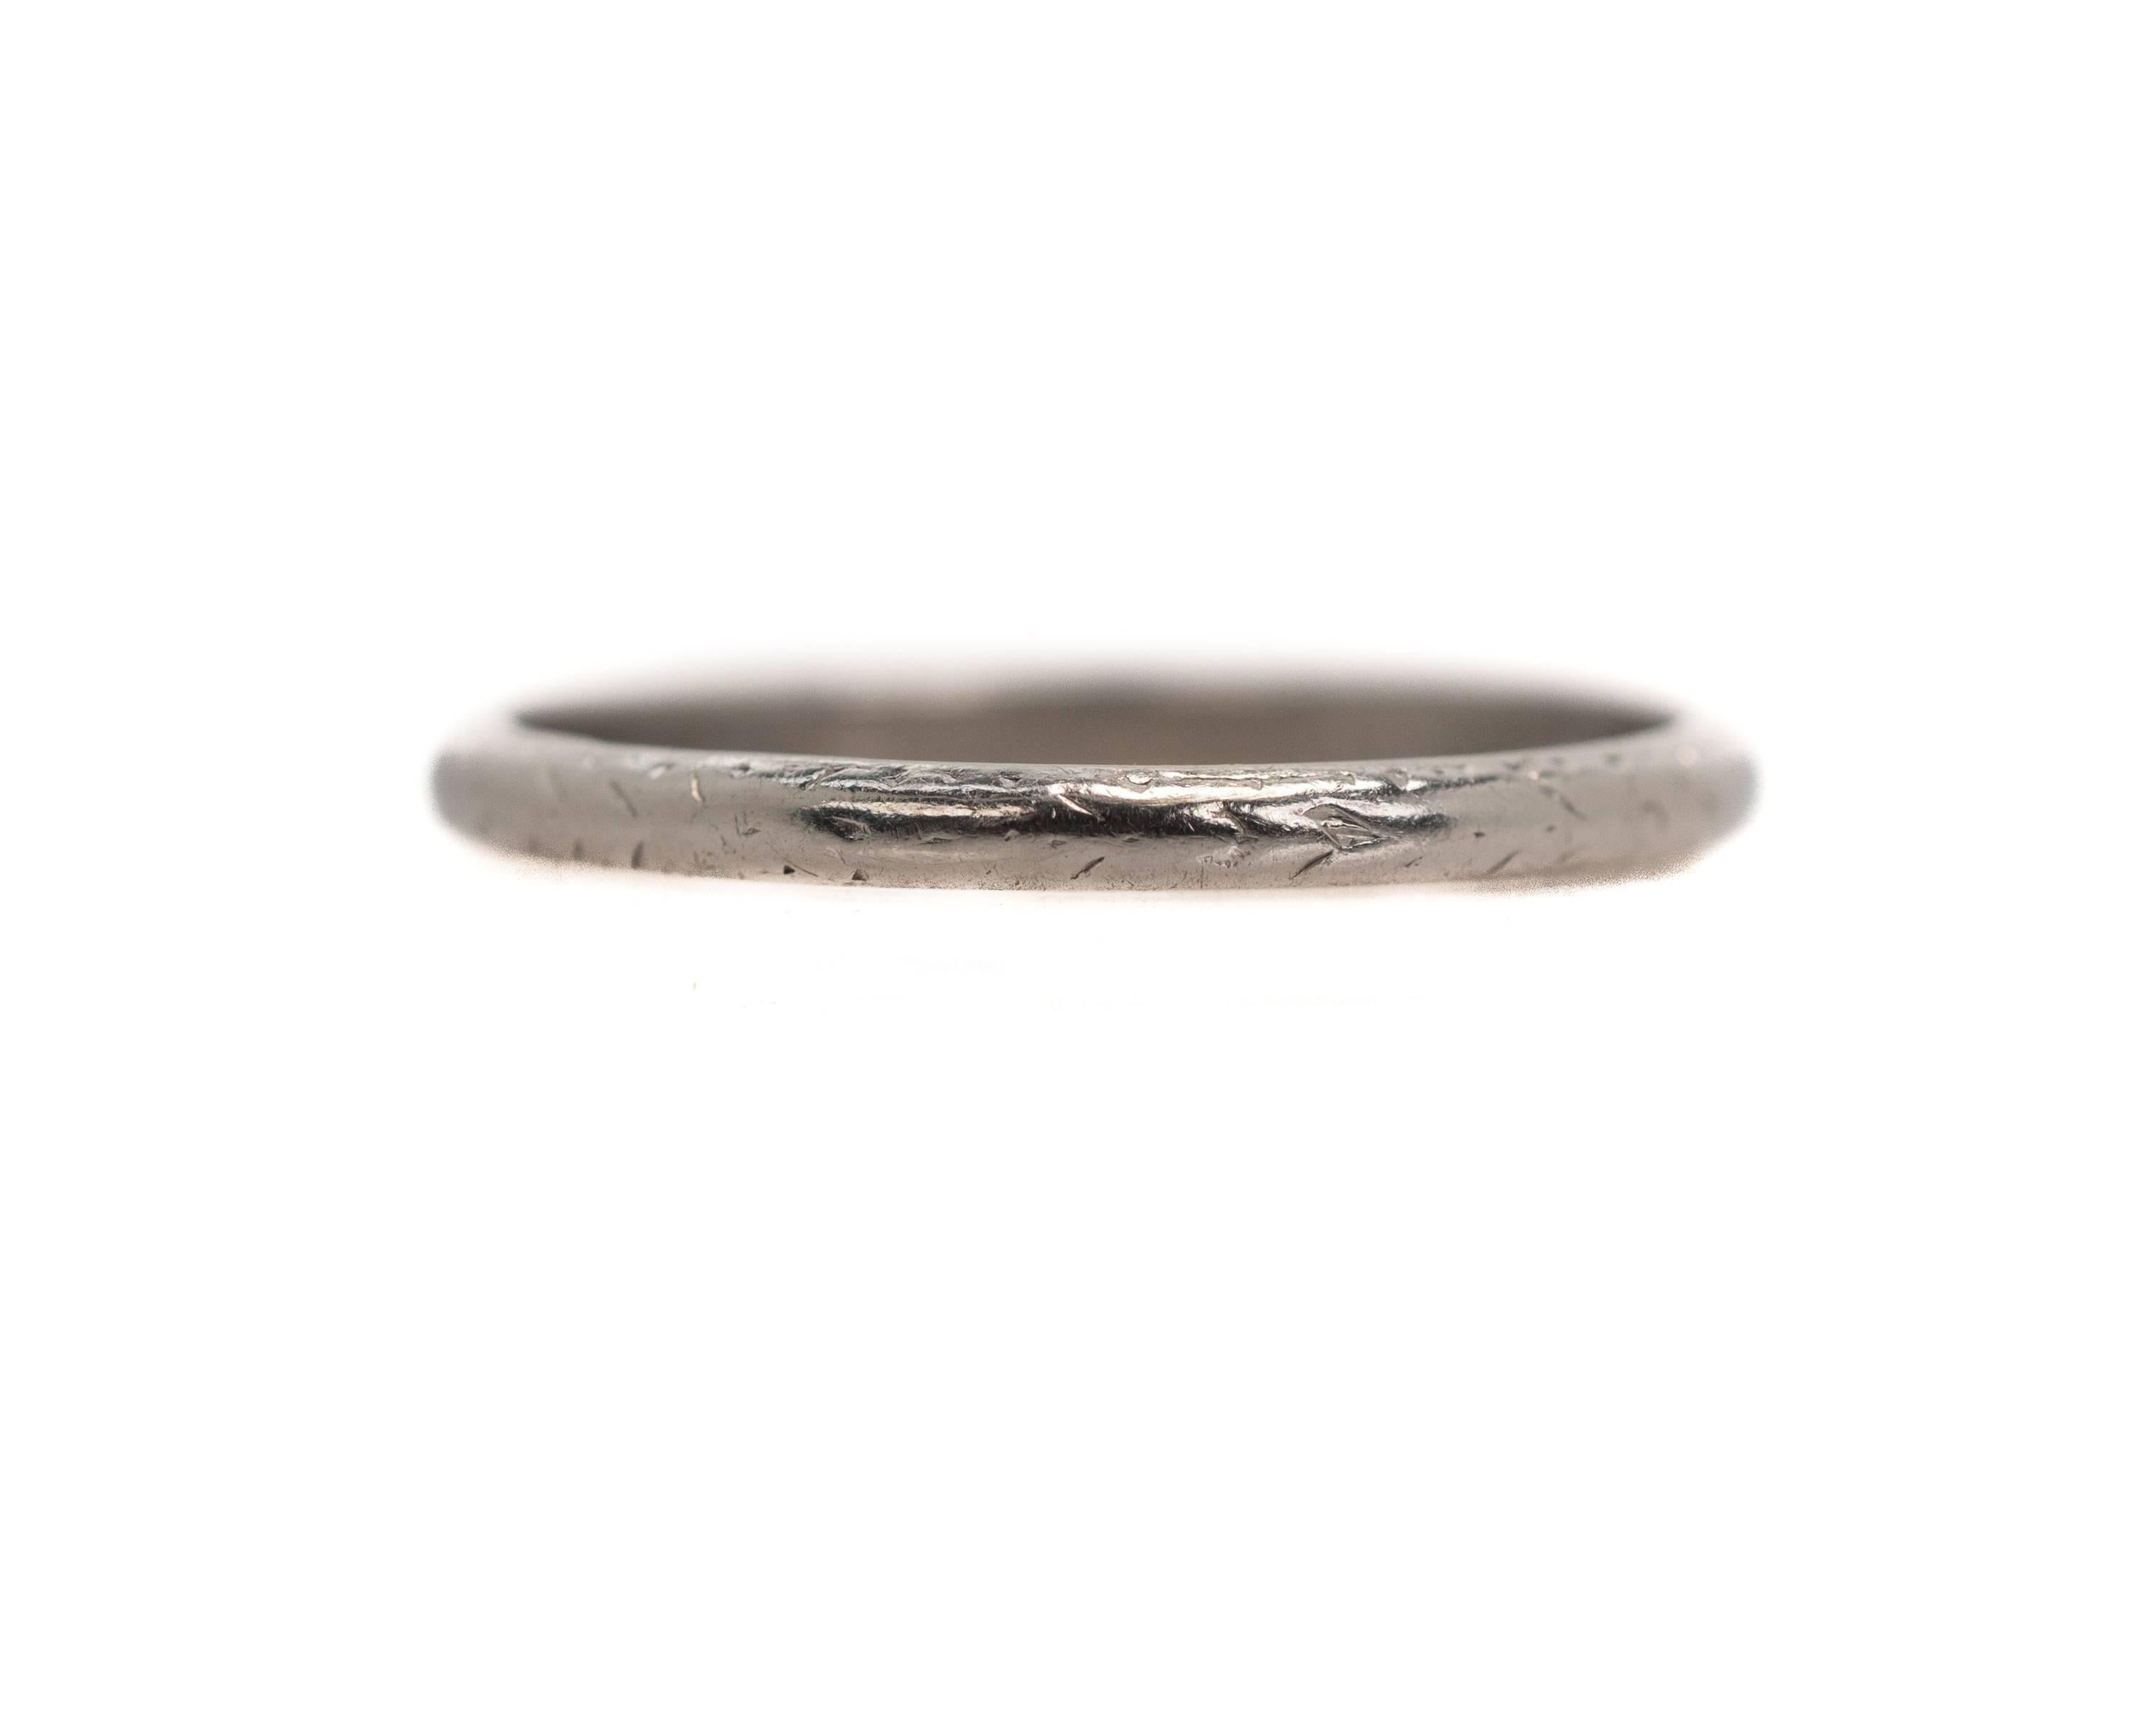 Thin Platinum Wedding Band, 1921 Art Deco Ultra Thin Band

This 1 millimeter wide Ultra Thin Wedding Band features a hand etched geometric pattern. The etching is faint which is common due to age and use. The ring is in excellent condition. It pairs